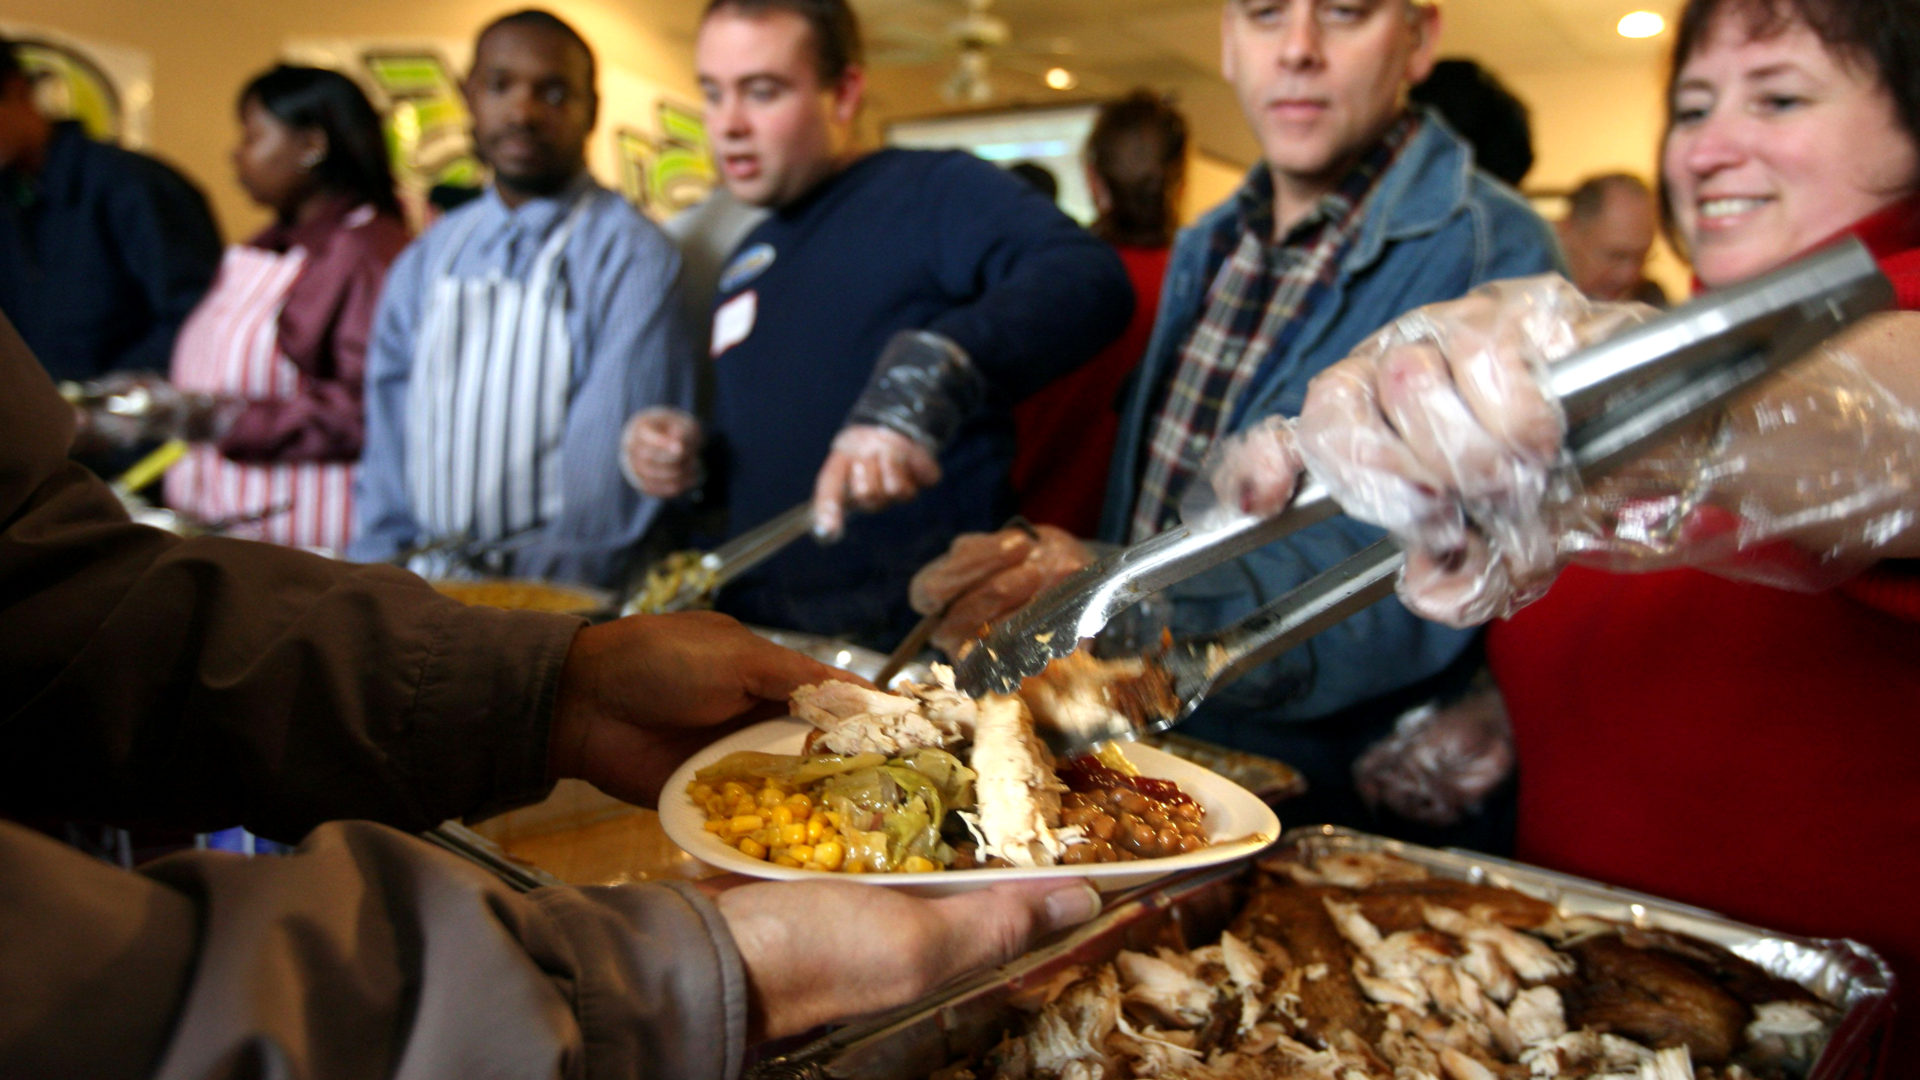 Here's a list of holiday meals for those in need in Cleveland, Ohio